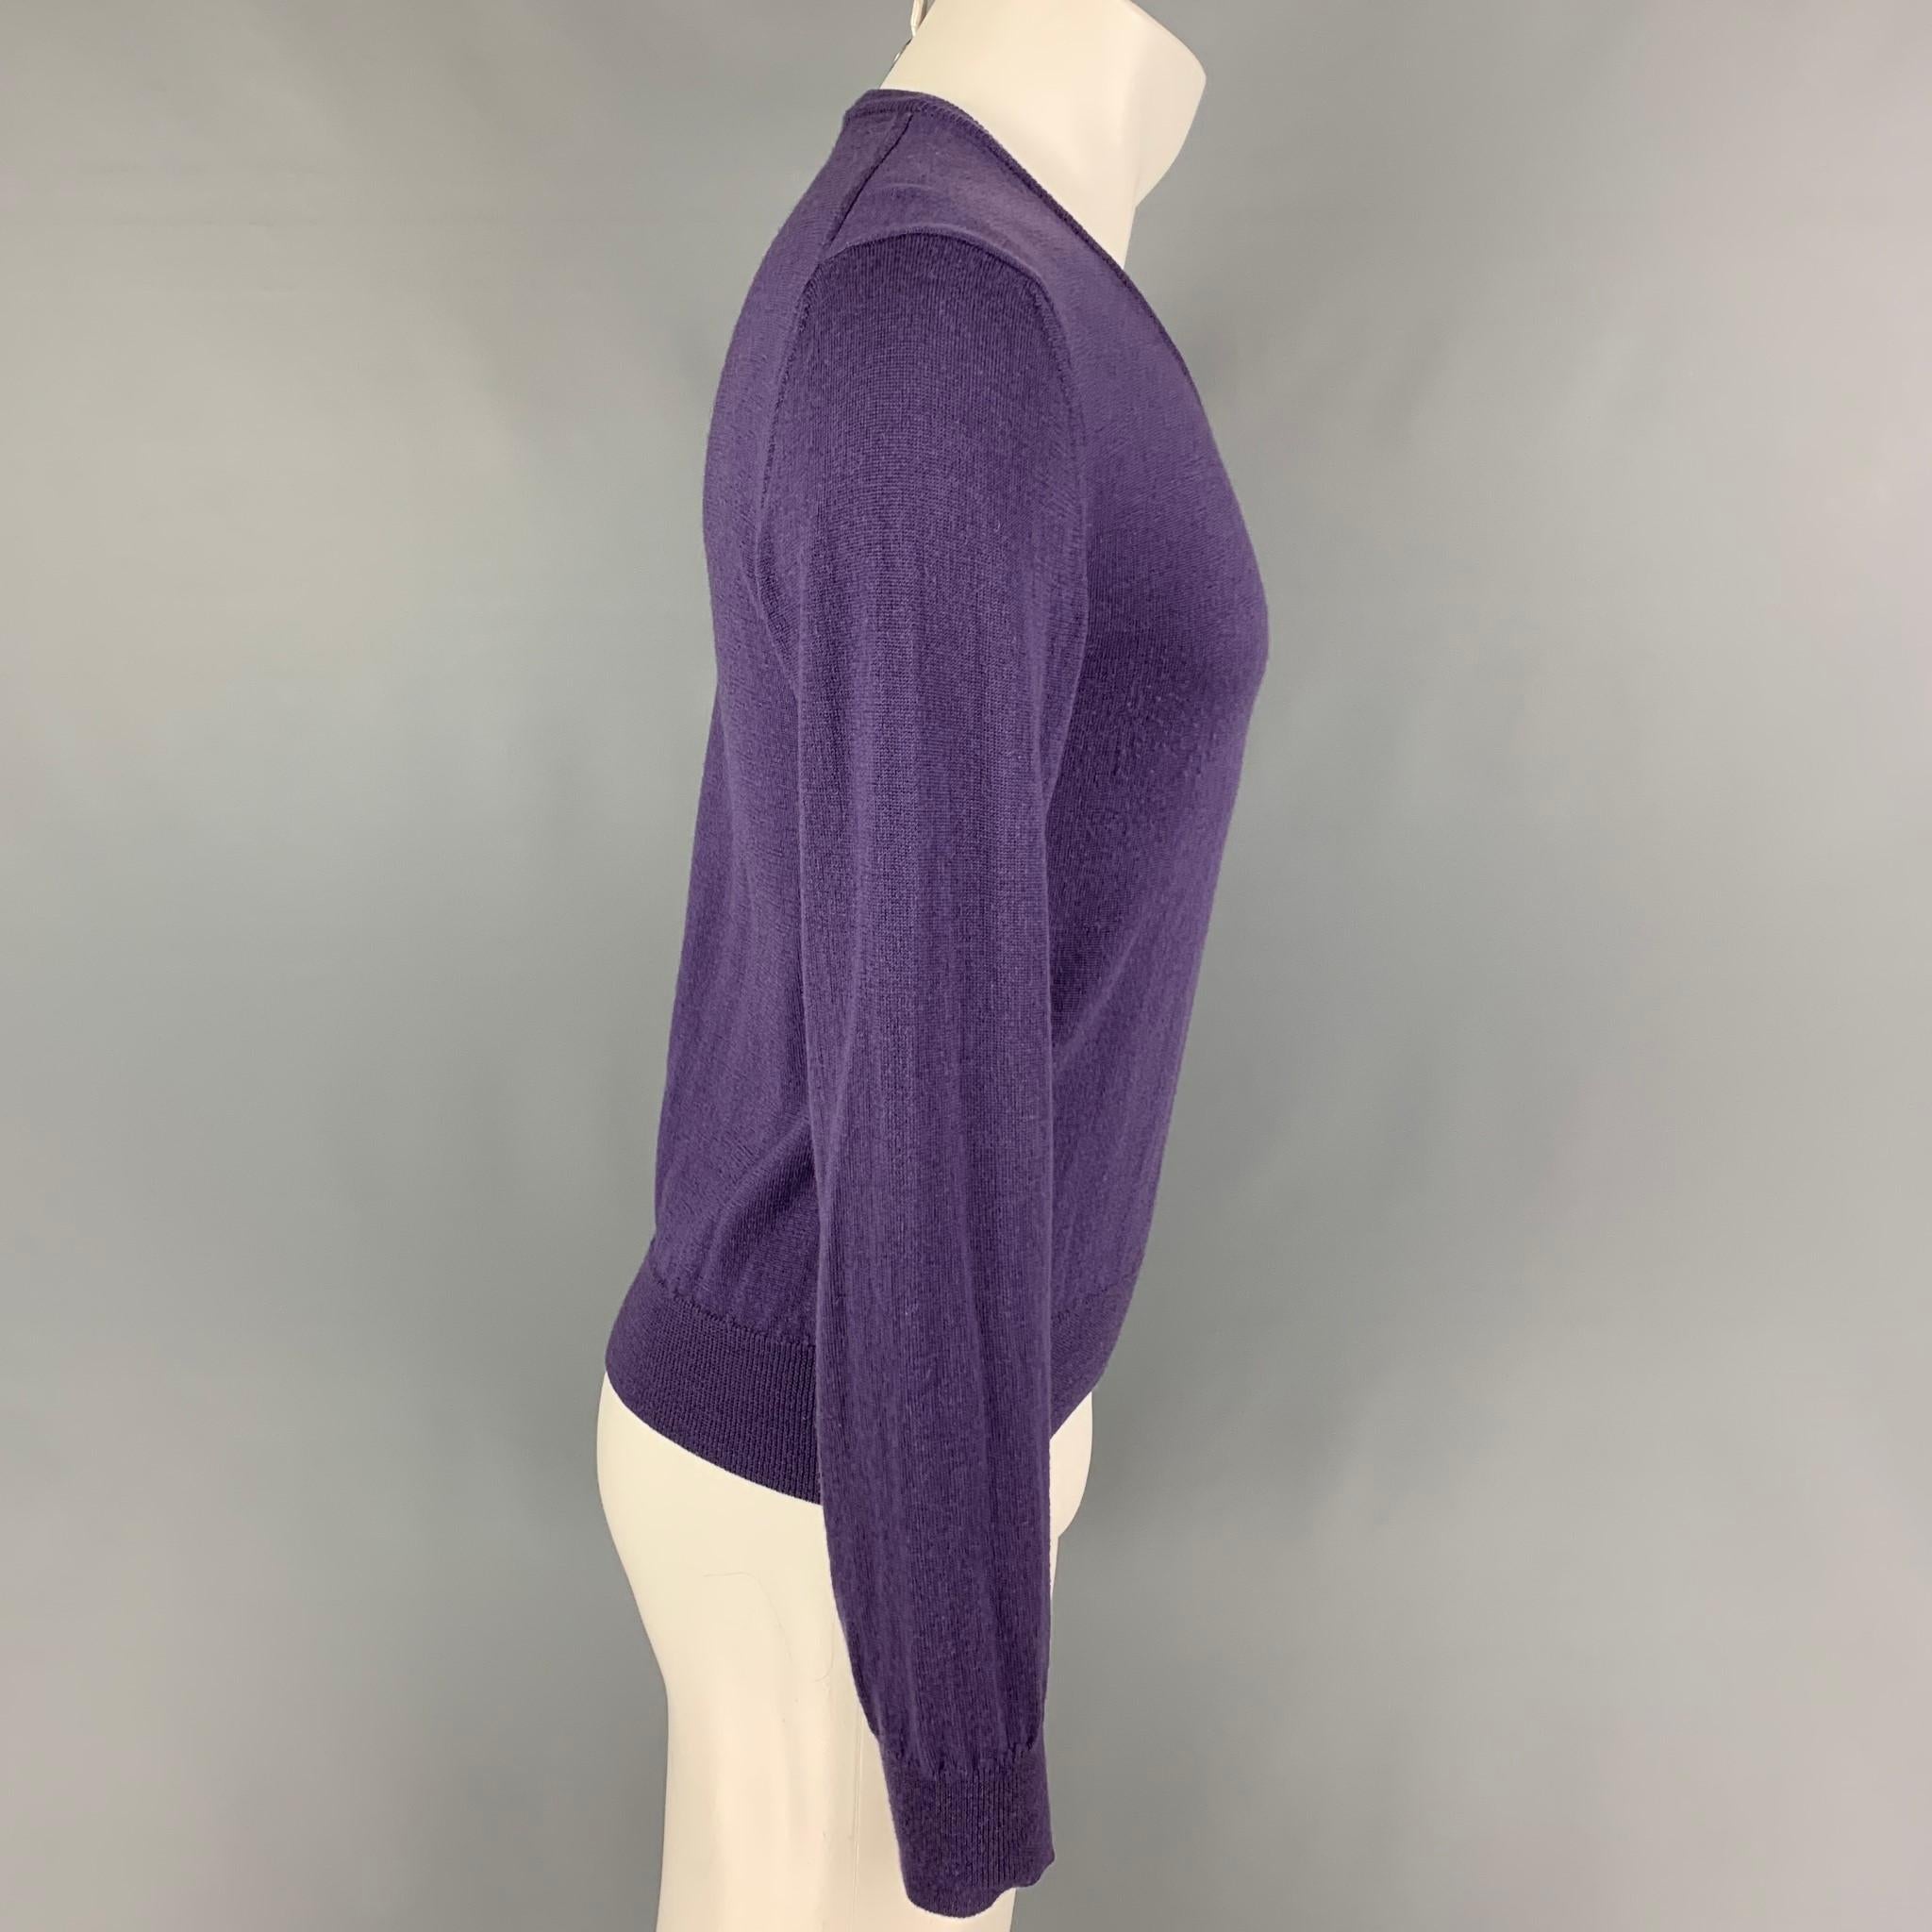 VERSACE COLLECTION pullover comes in a purple wool featuring a embroidered logo and a v-neck. 

Very Good Pre-Owned Condition.
Marked: S

Measurements:

Shoulder: 18 in.
Chest: 36 in.
Sleeve: 26.5 in.
Length: 23 in.